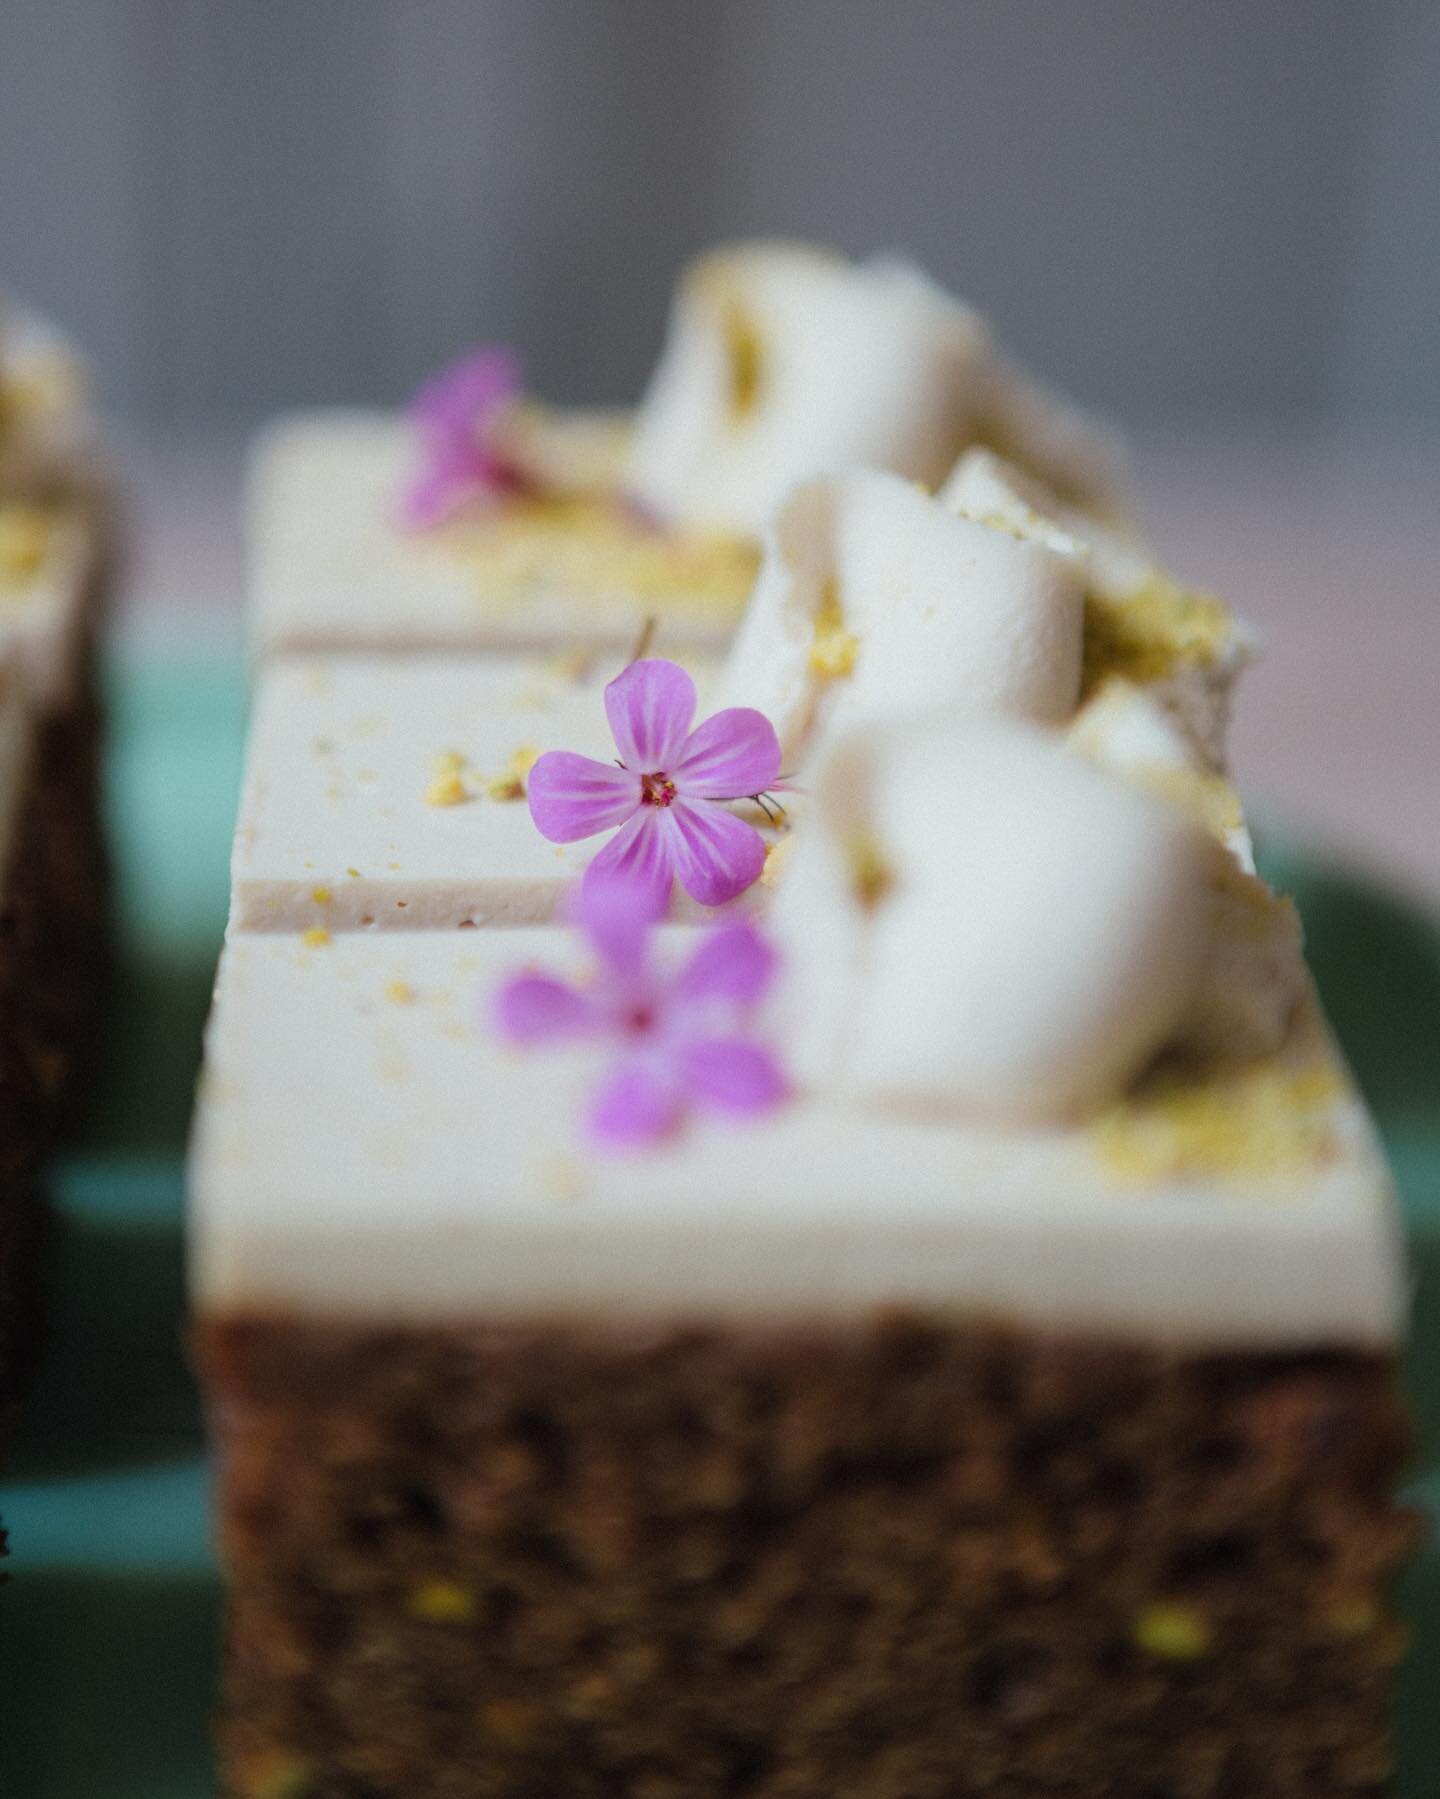 Winners at the great taste awards this week.
🌱
Both with a gold star.
🌱
Spiced Chai and Pistachio Cake with a Lemongrass Cream.
🌱
Macadamia Bars with a Peppermint Chocolate.
🌱
In each of these I&rsquo;ve used essential oils, I use many of these i